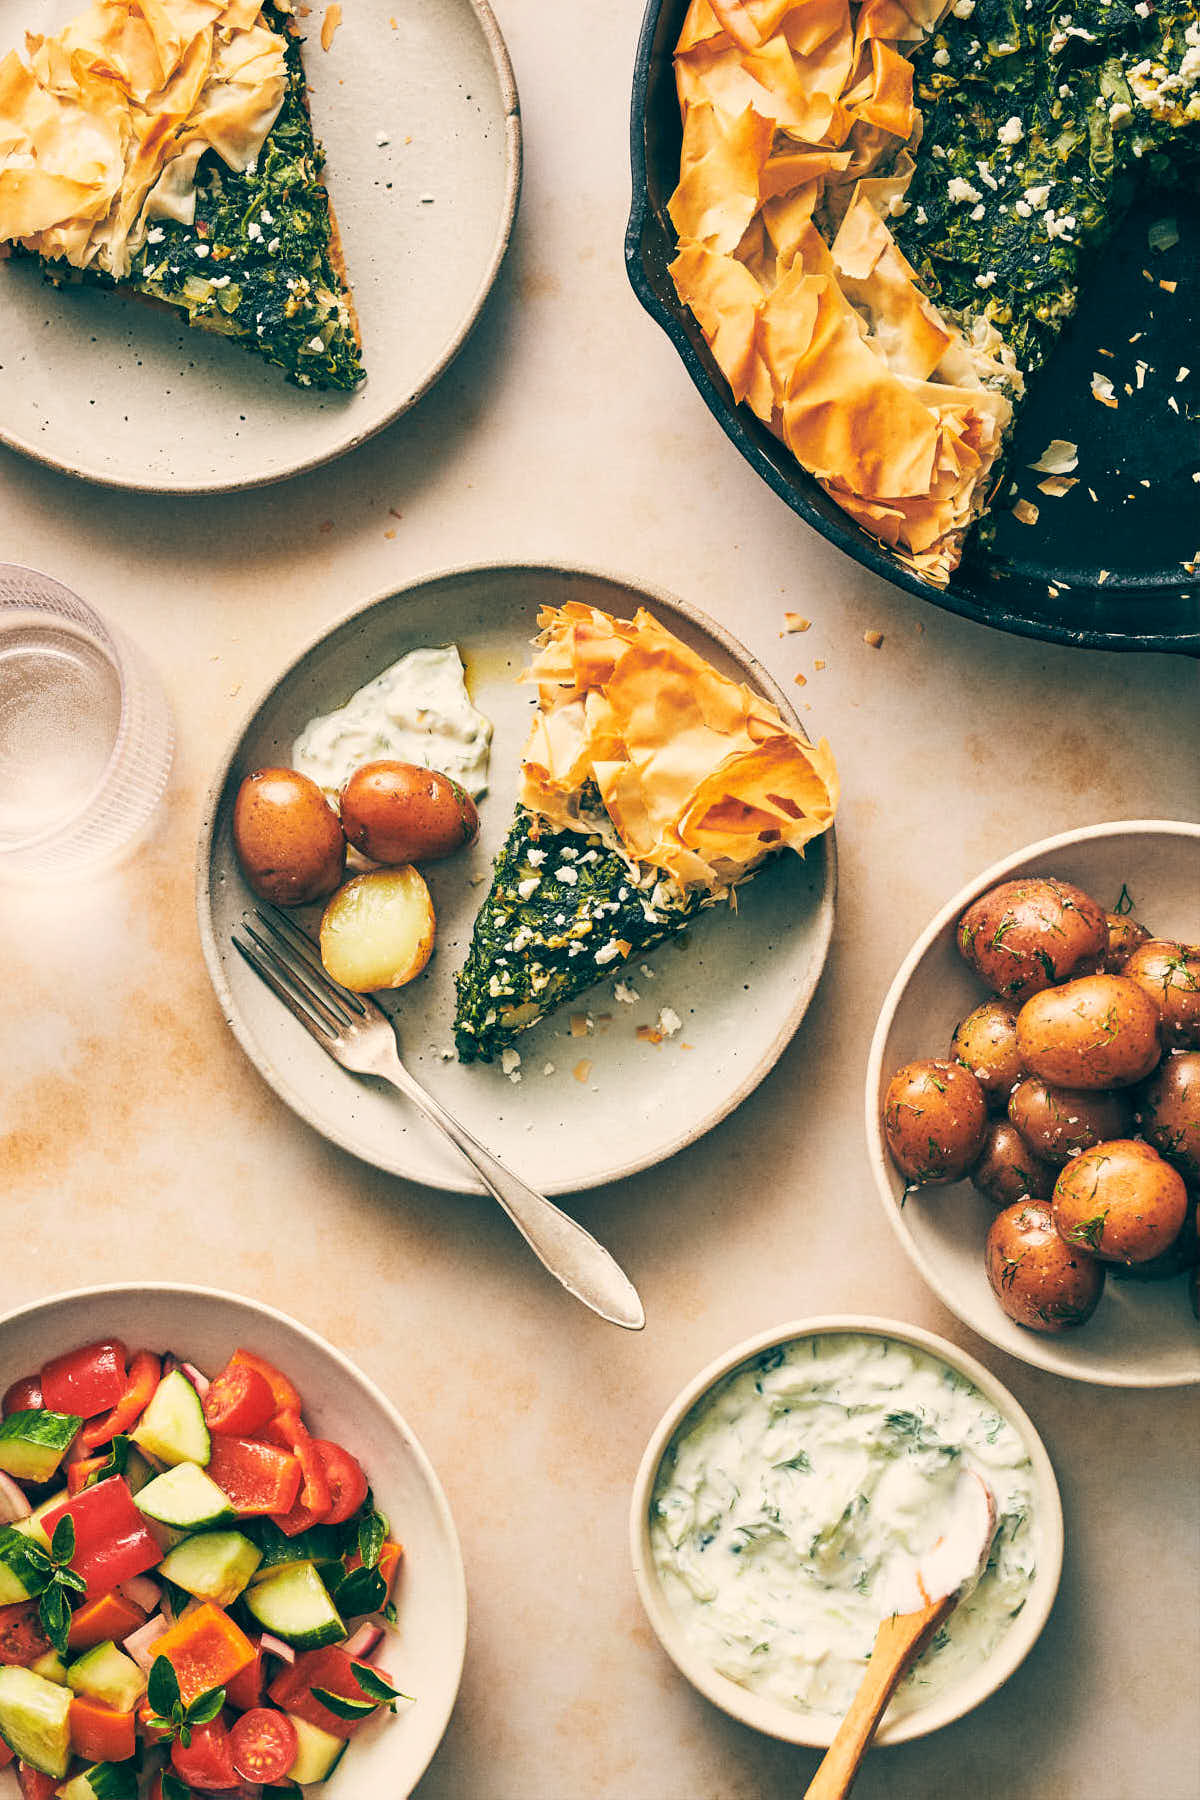 Plates with slices of spanakopita, roasted potatoes and Greek salad